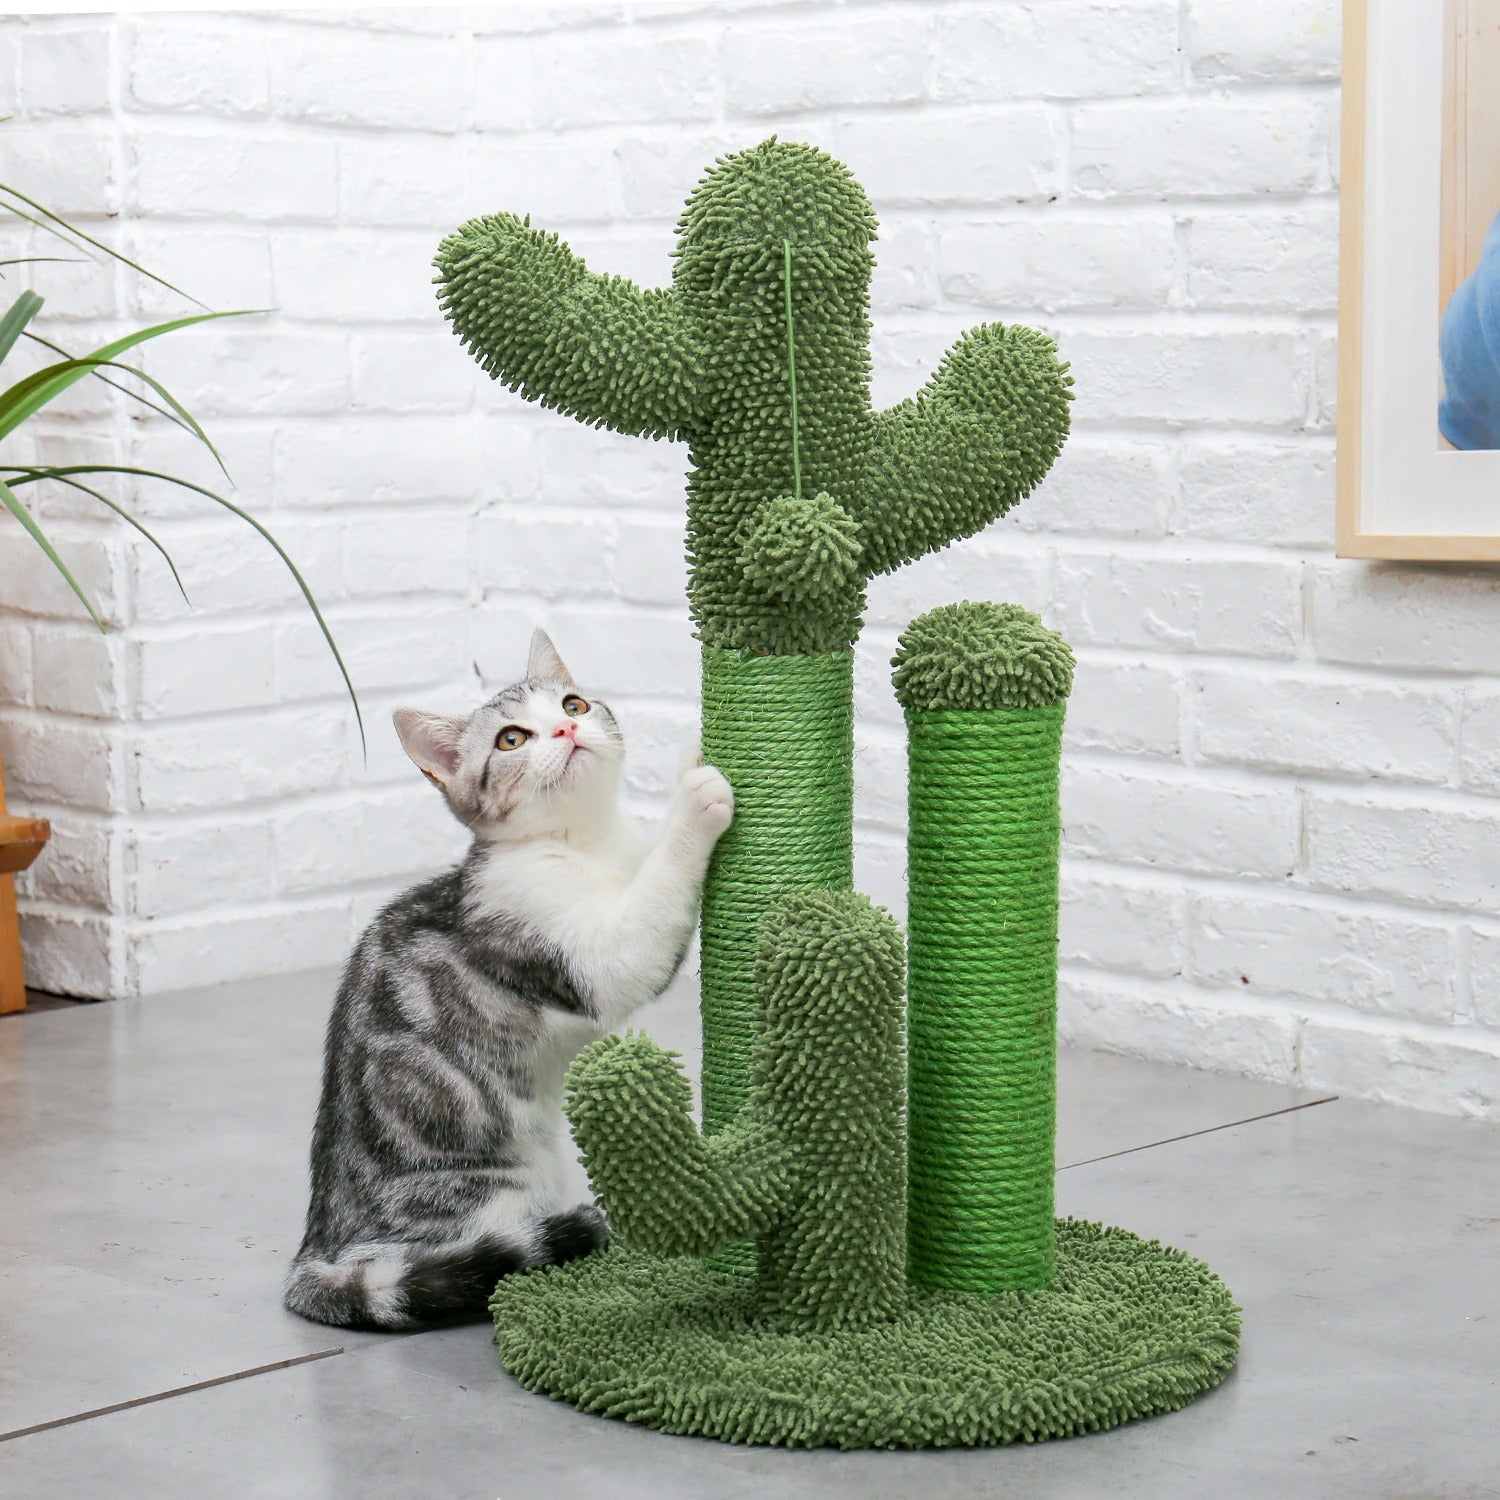 A green cat scratching post which looks like a cactus. A grey and white kitten is sharpening its claws on the cactus.